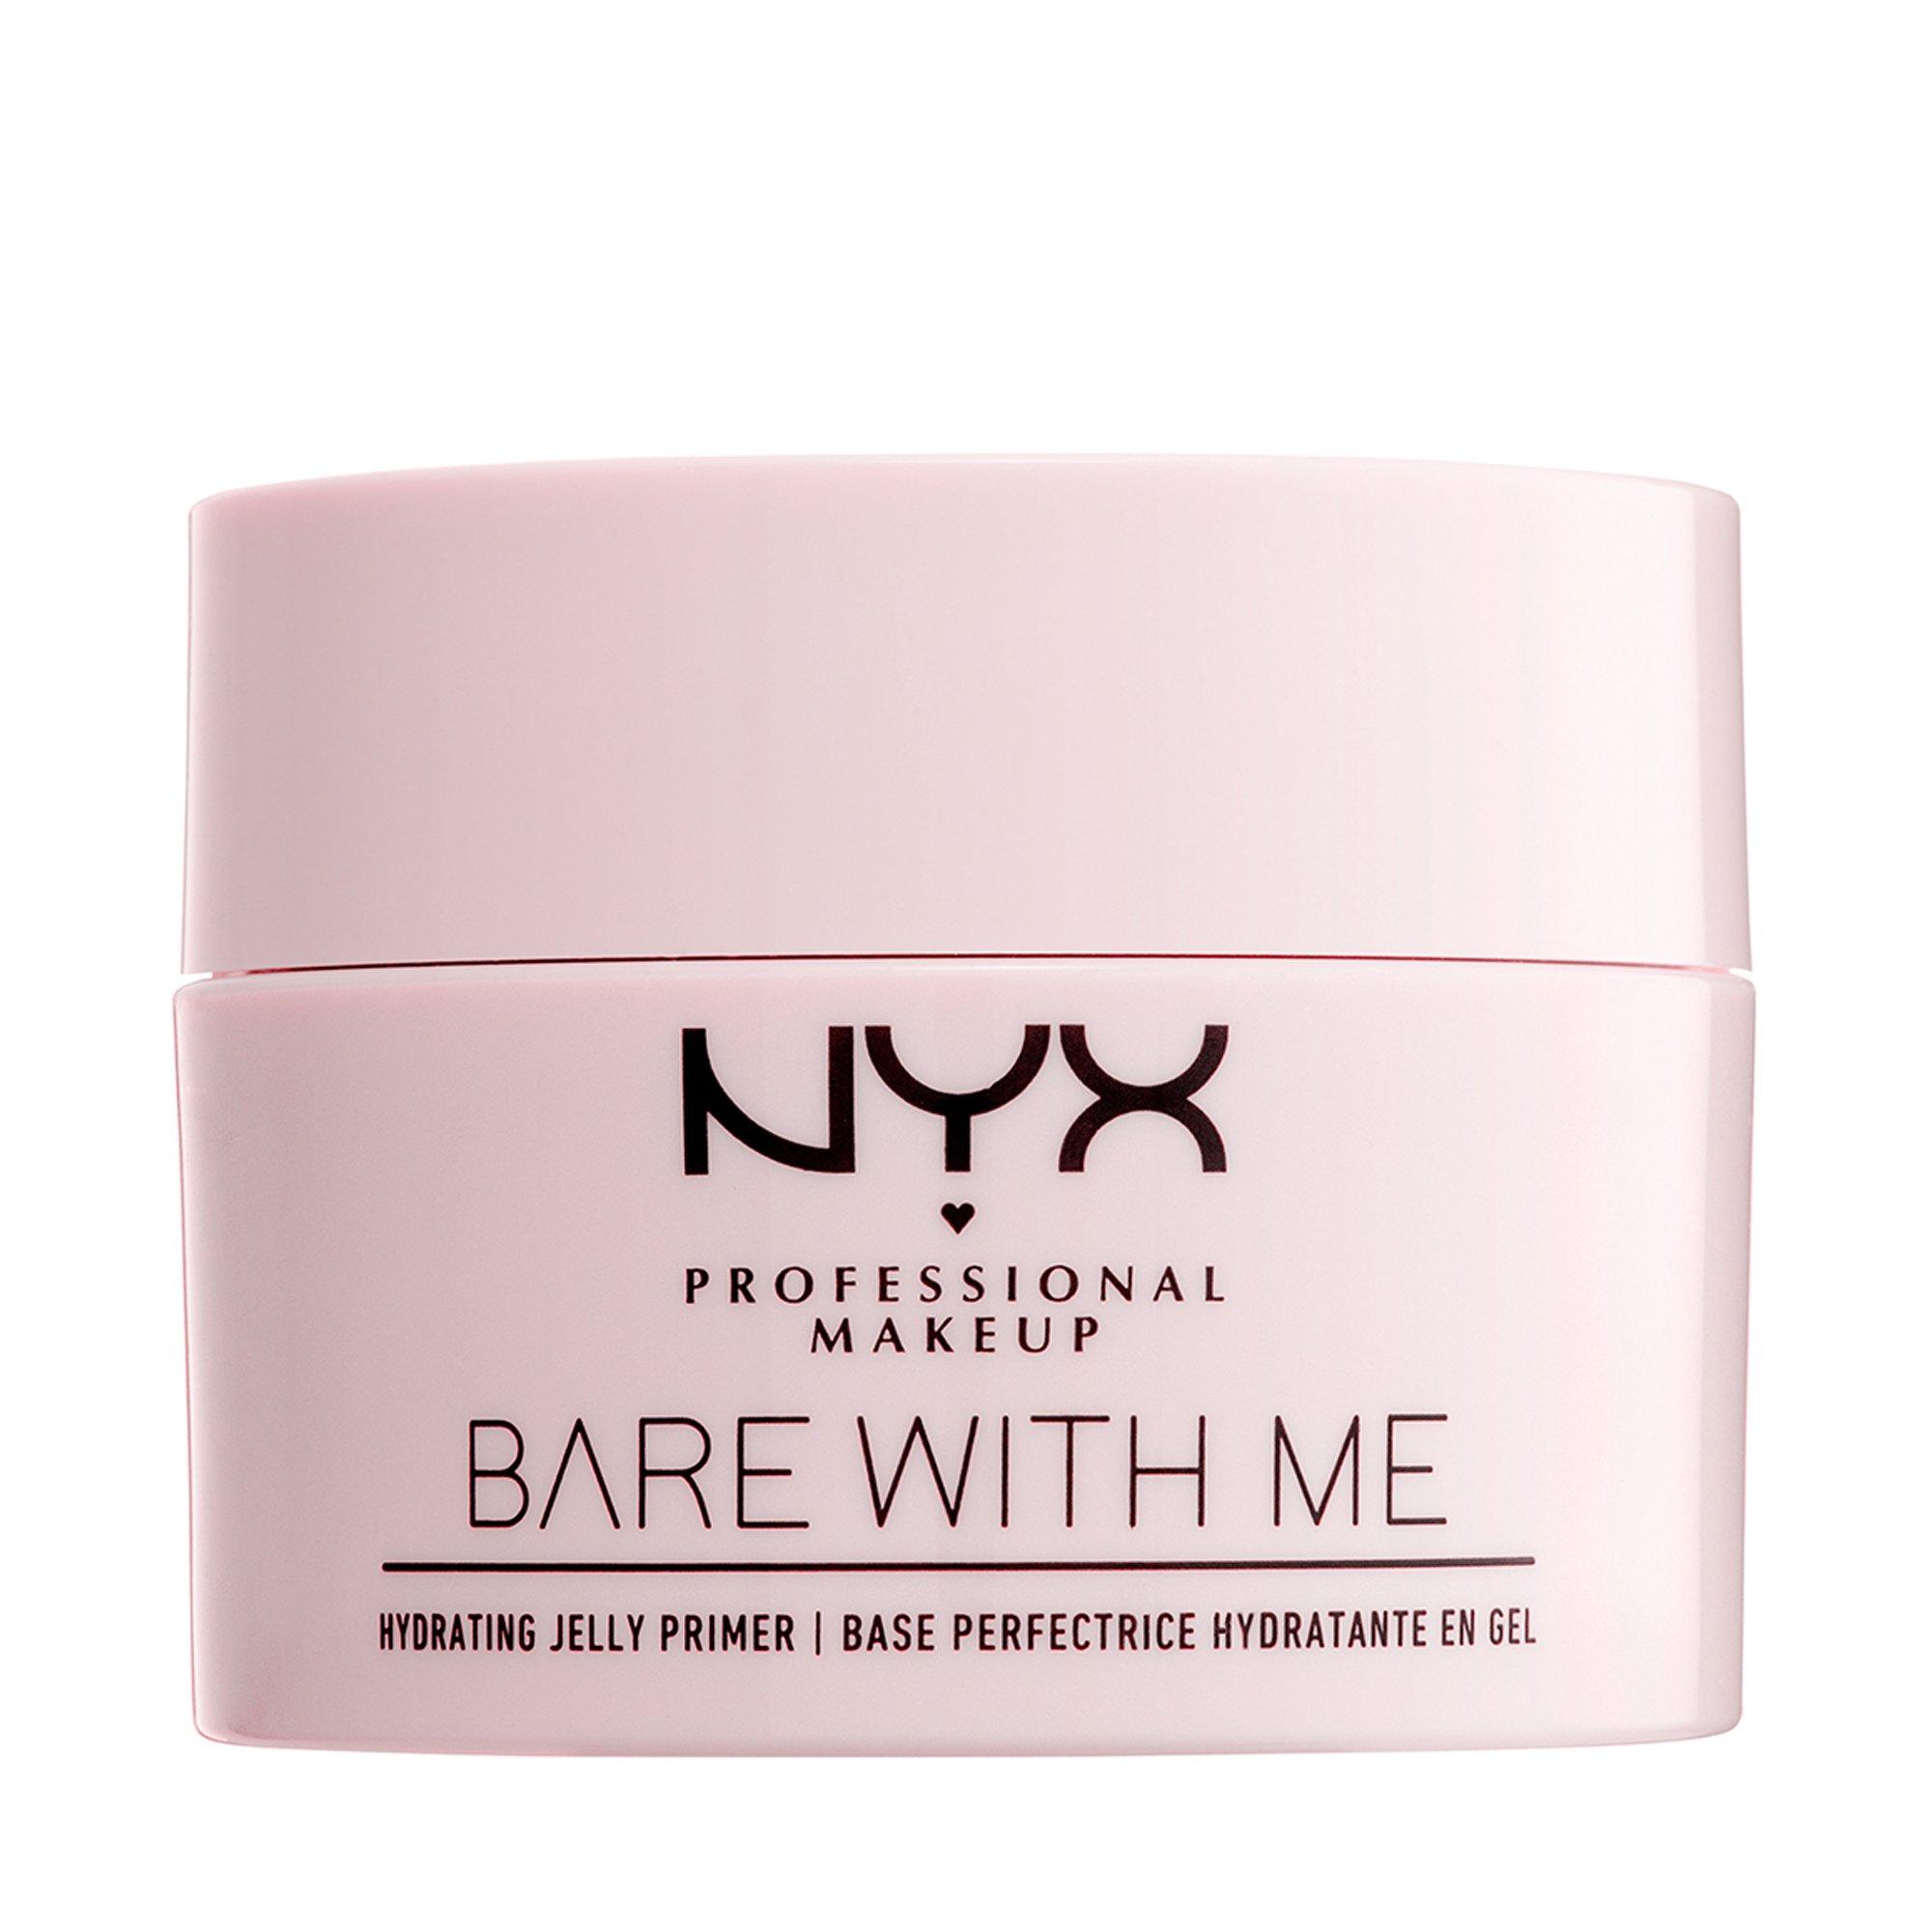 Image of NYX-PROFESSIONAL-MAKEUP Bare With Me Bare With Me Hydrating Jelly Primer - 40g